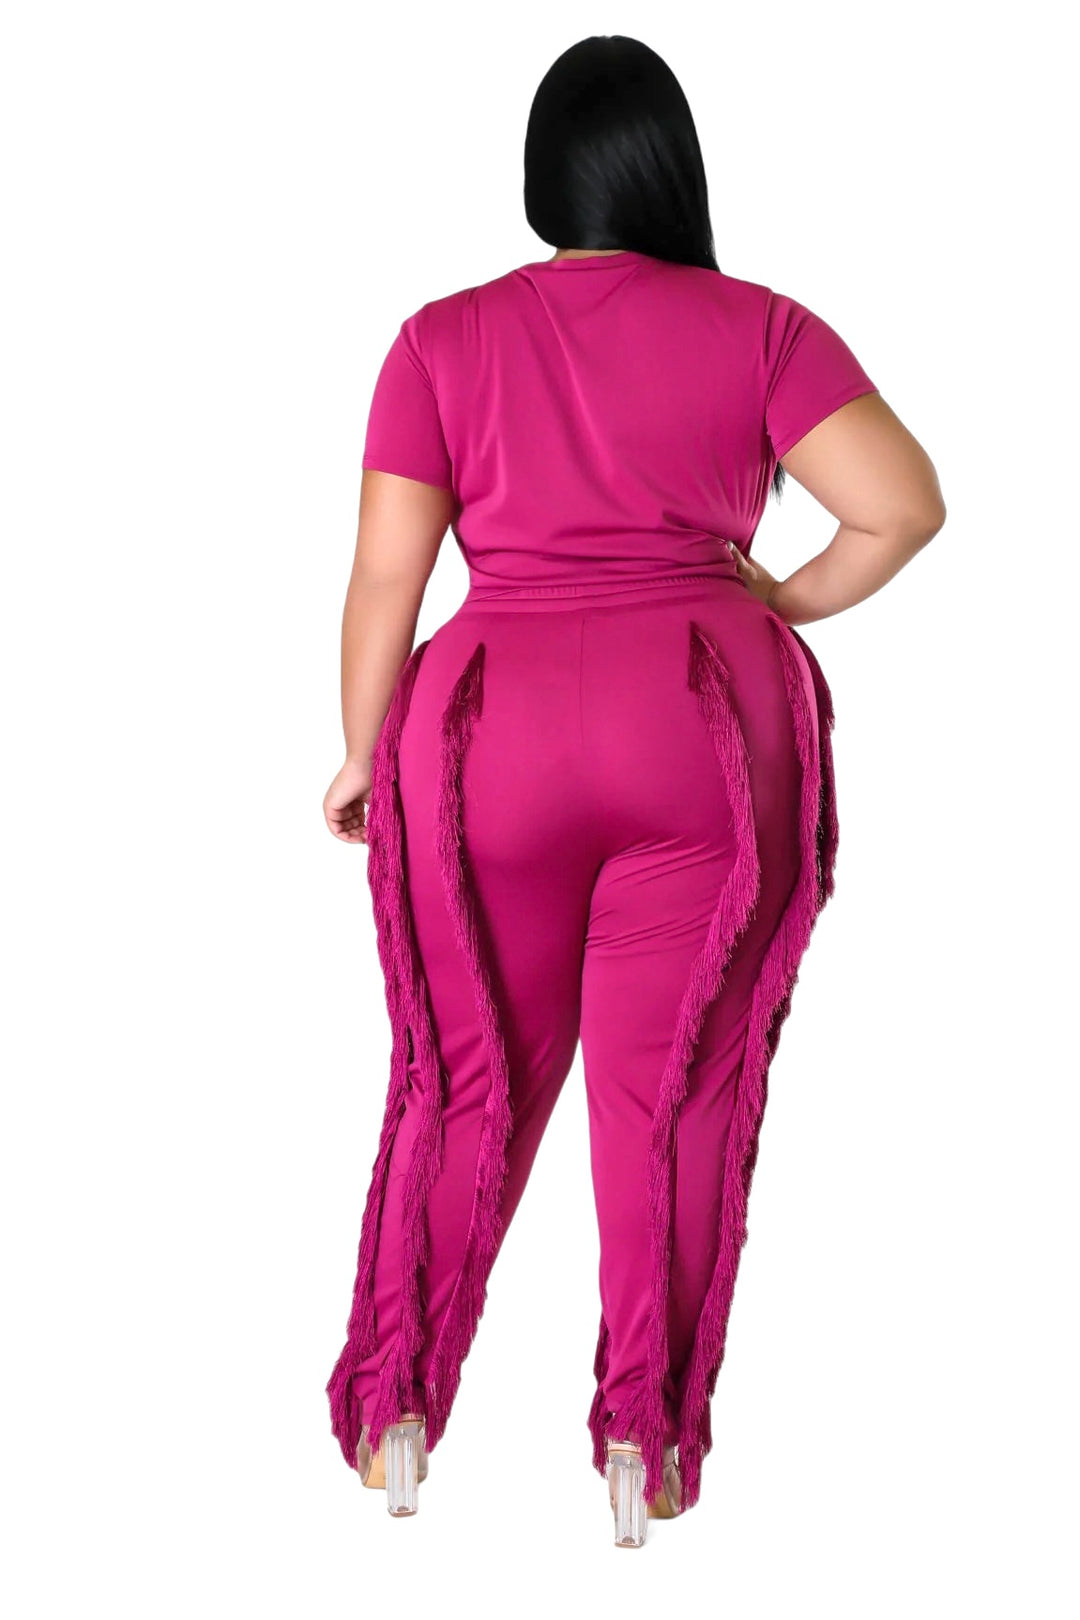 a woman wearing a pink jumpsuit with ruffles